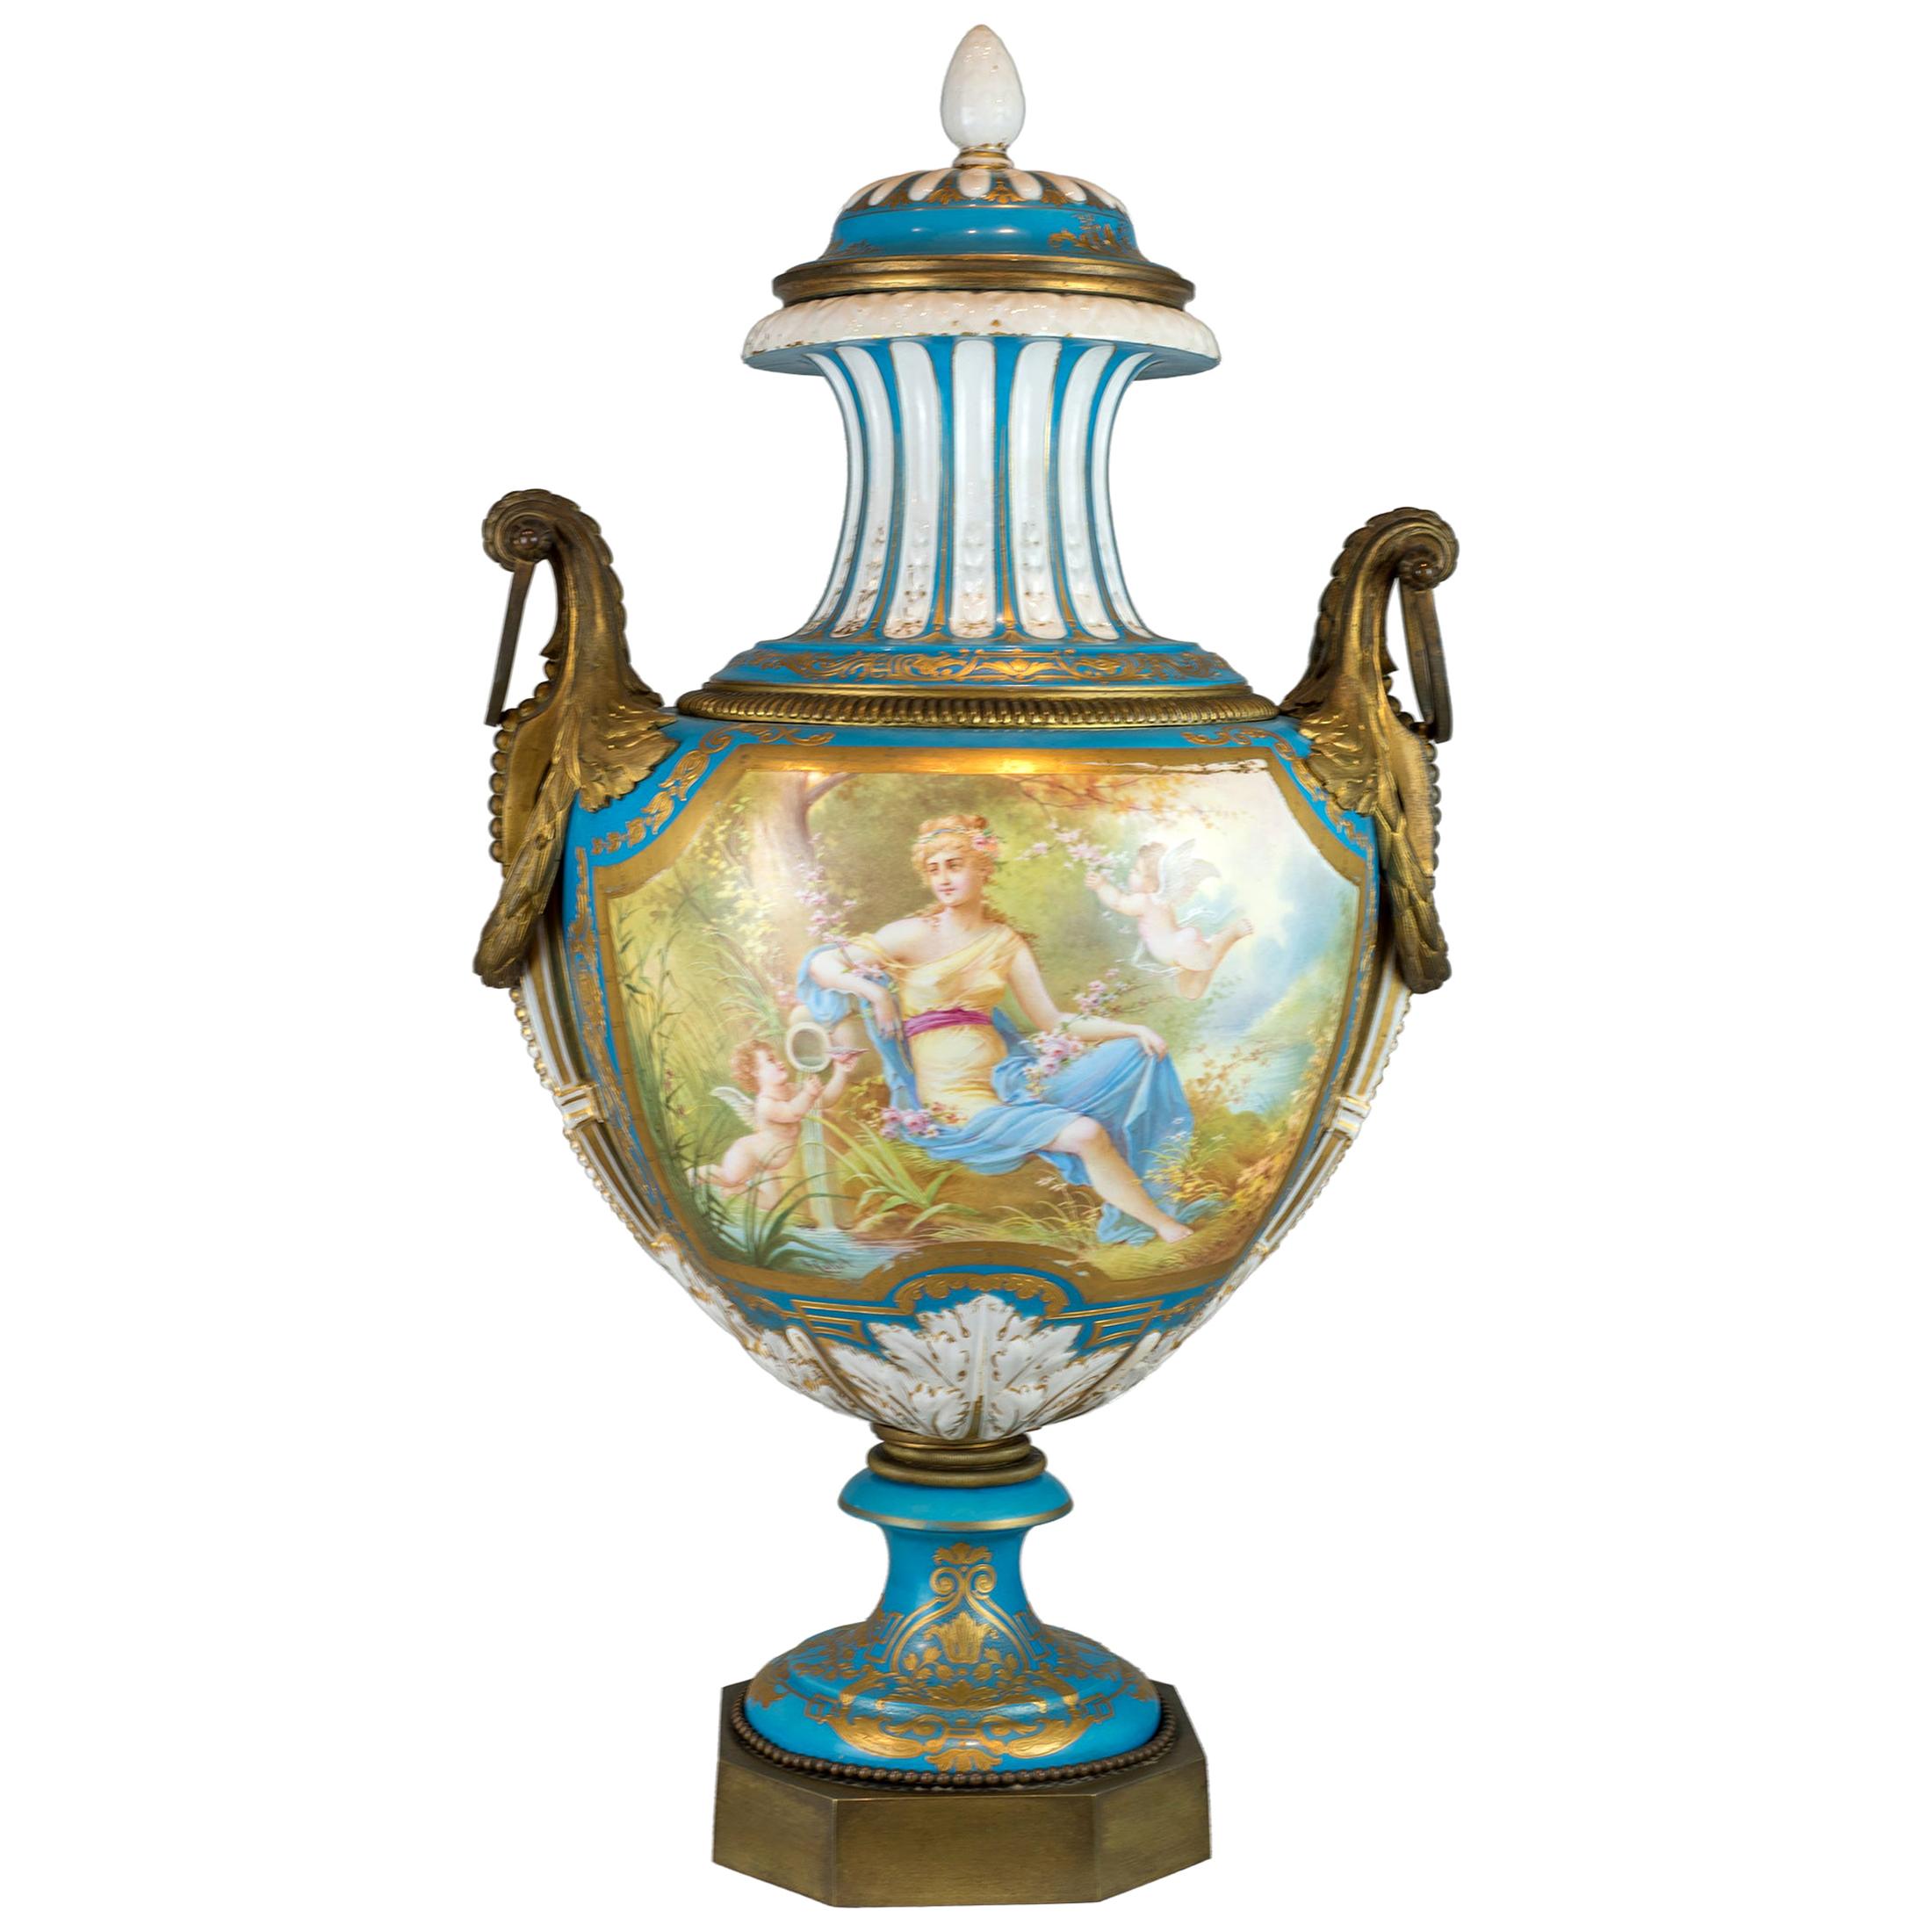 Ormolu-Mounted Sèvres Style Turquoise-Ground Vase and Cover